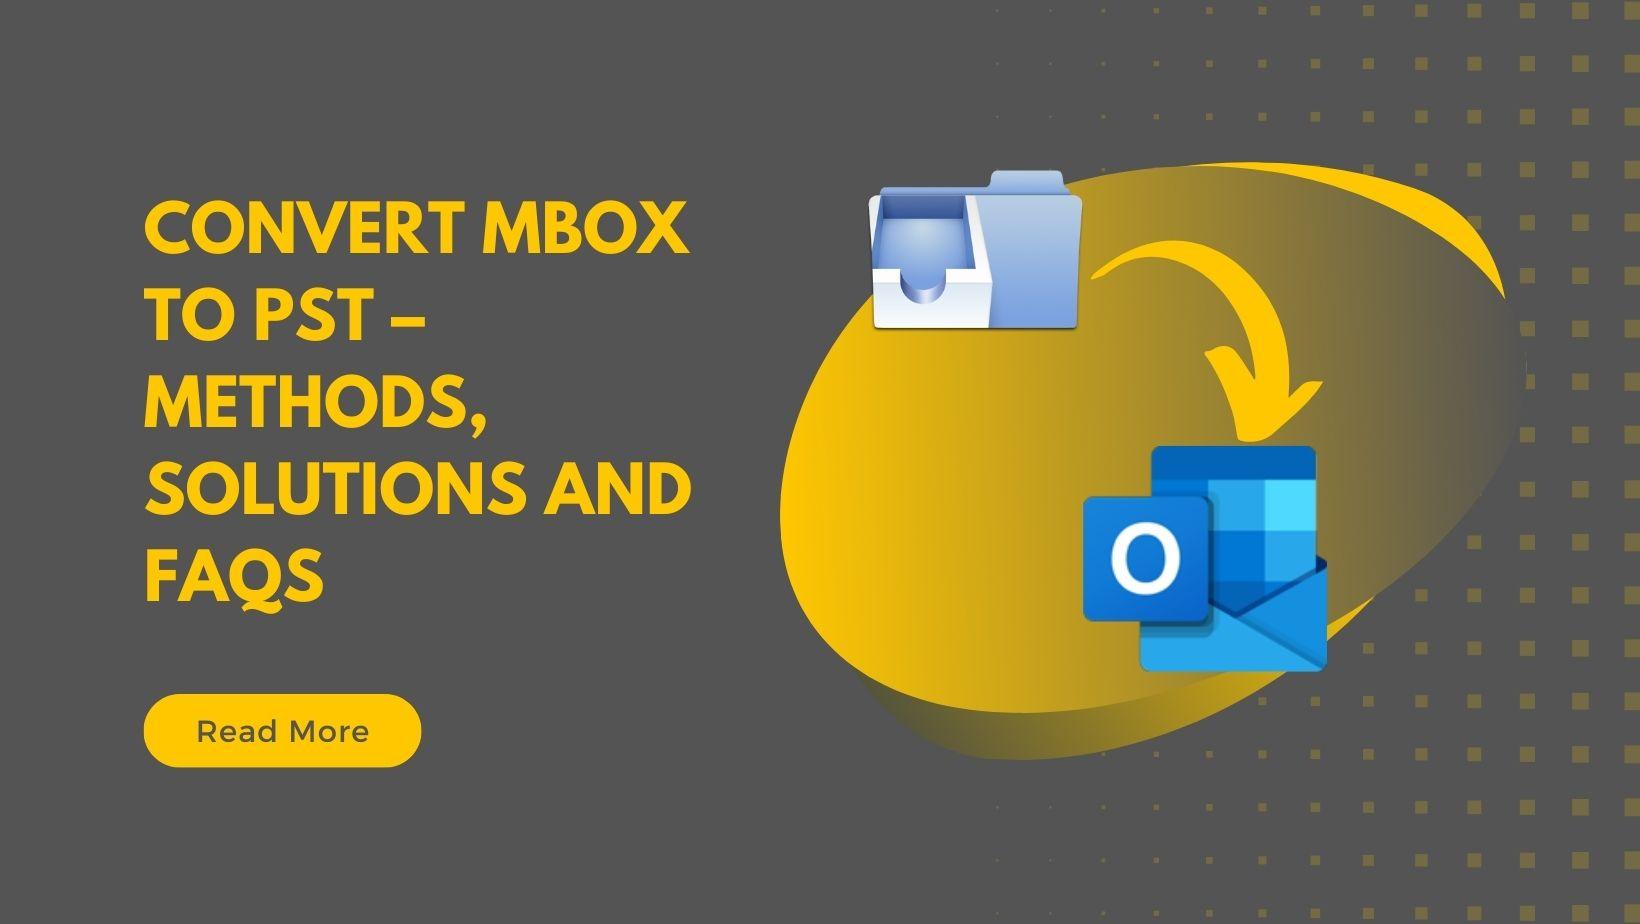 Convert MBOX to PST – Methods, Solutions and FAQs